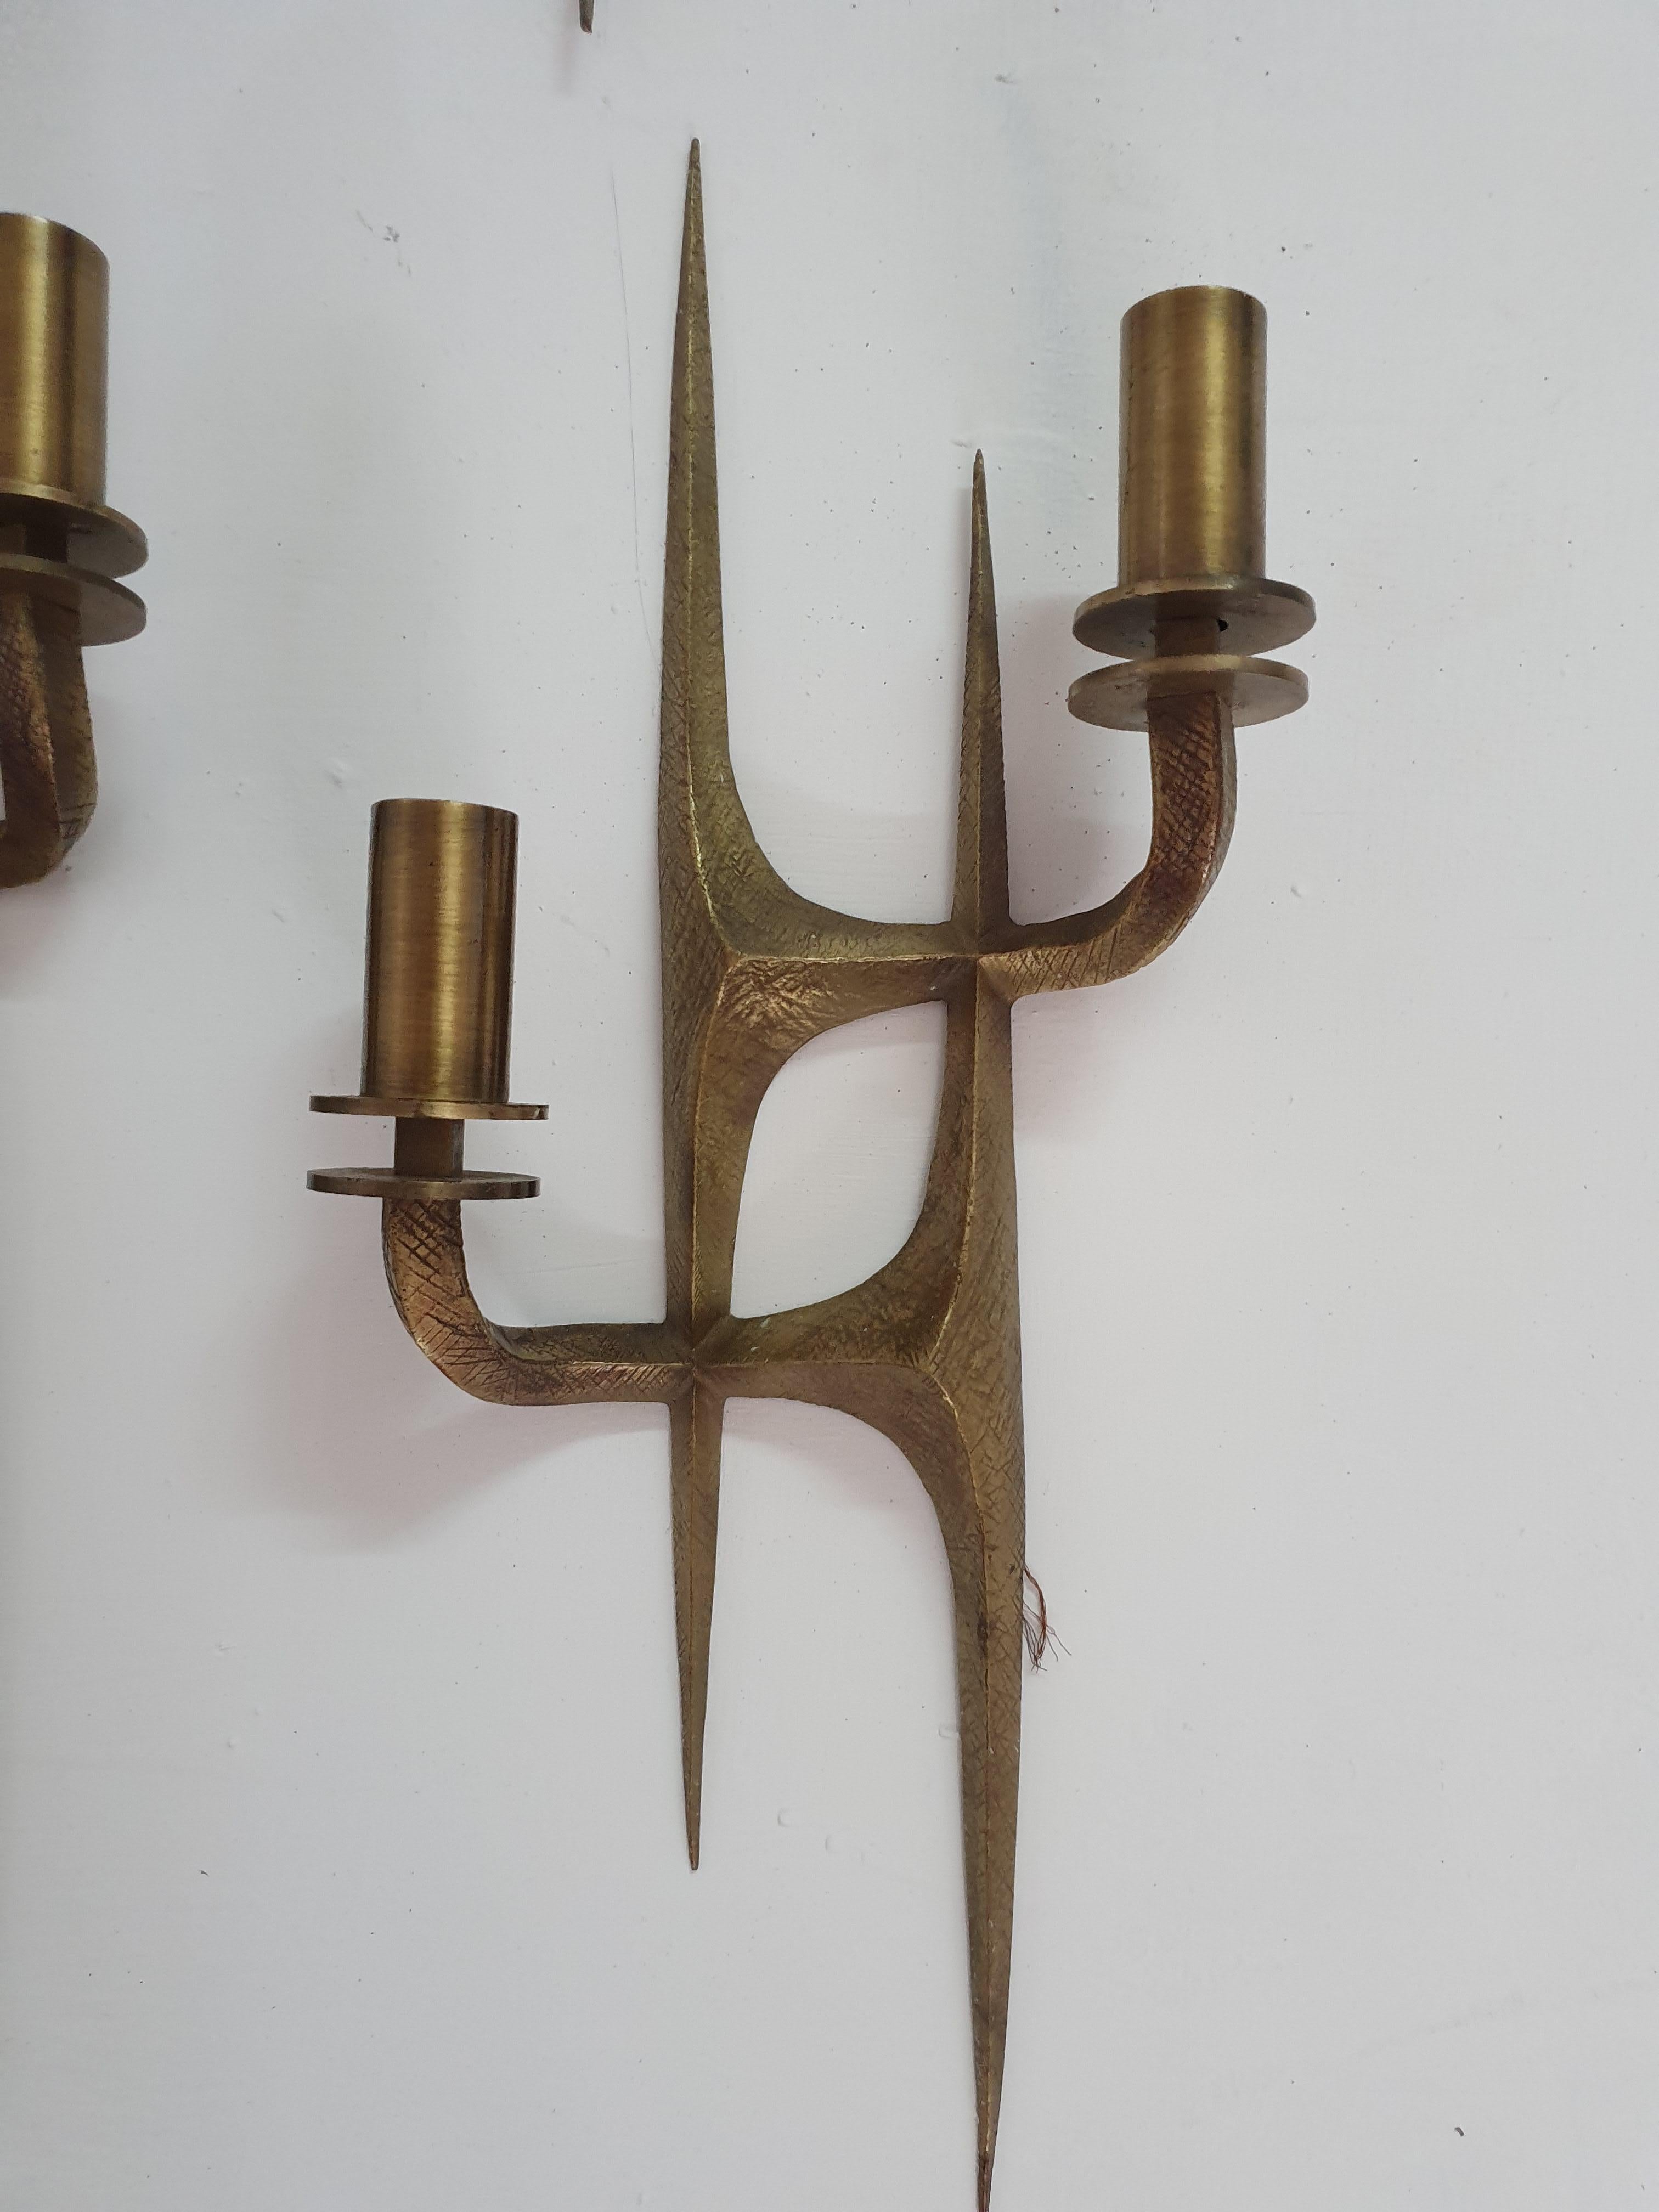 Pair of 2-light brass sconces in the manner of Felix Agostini.
There are 2 pairs available, part of a set of 6 together with a pair of 4-light sconces listed in our gallery as well.
They all came from the same Villa in Italy.
They are done in a